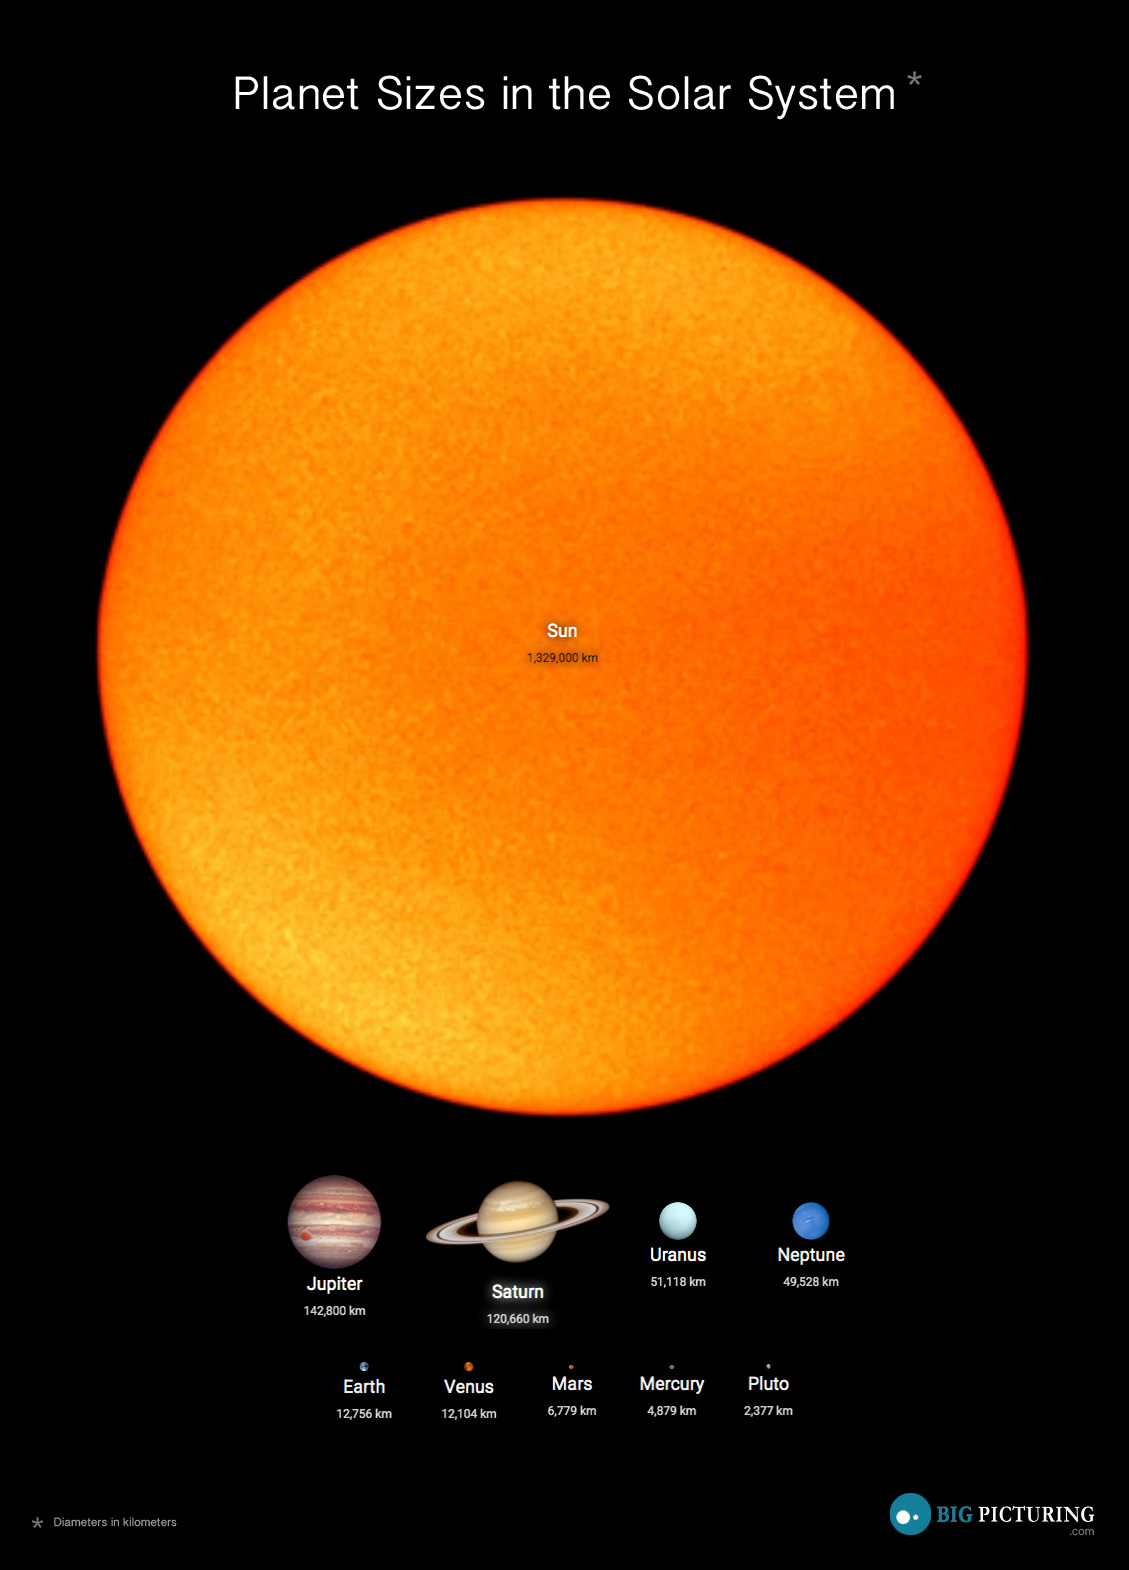 Planets Sizes in the Solar System - Big Picturing